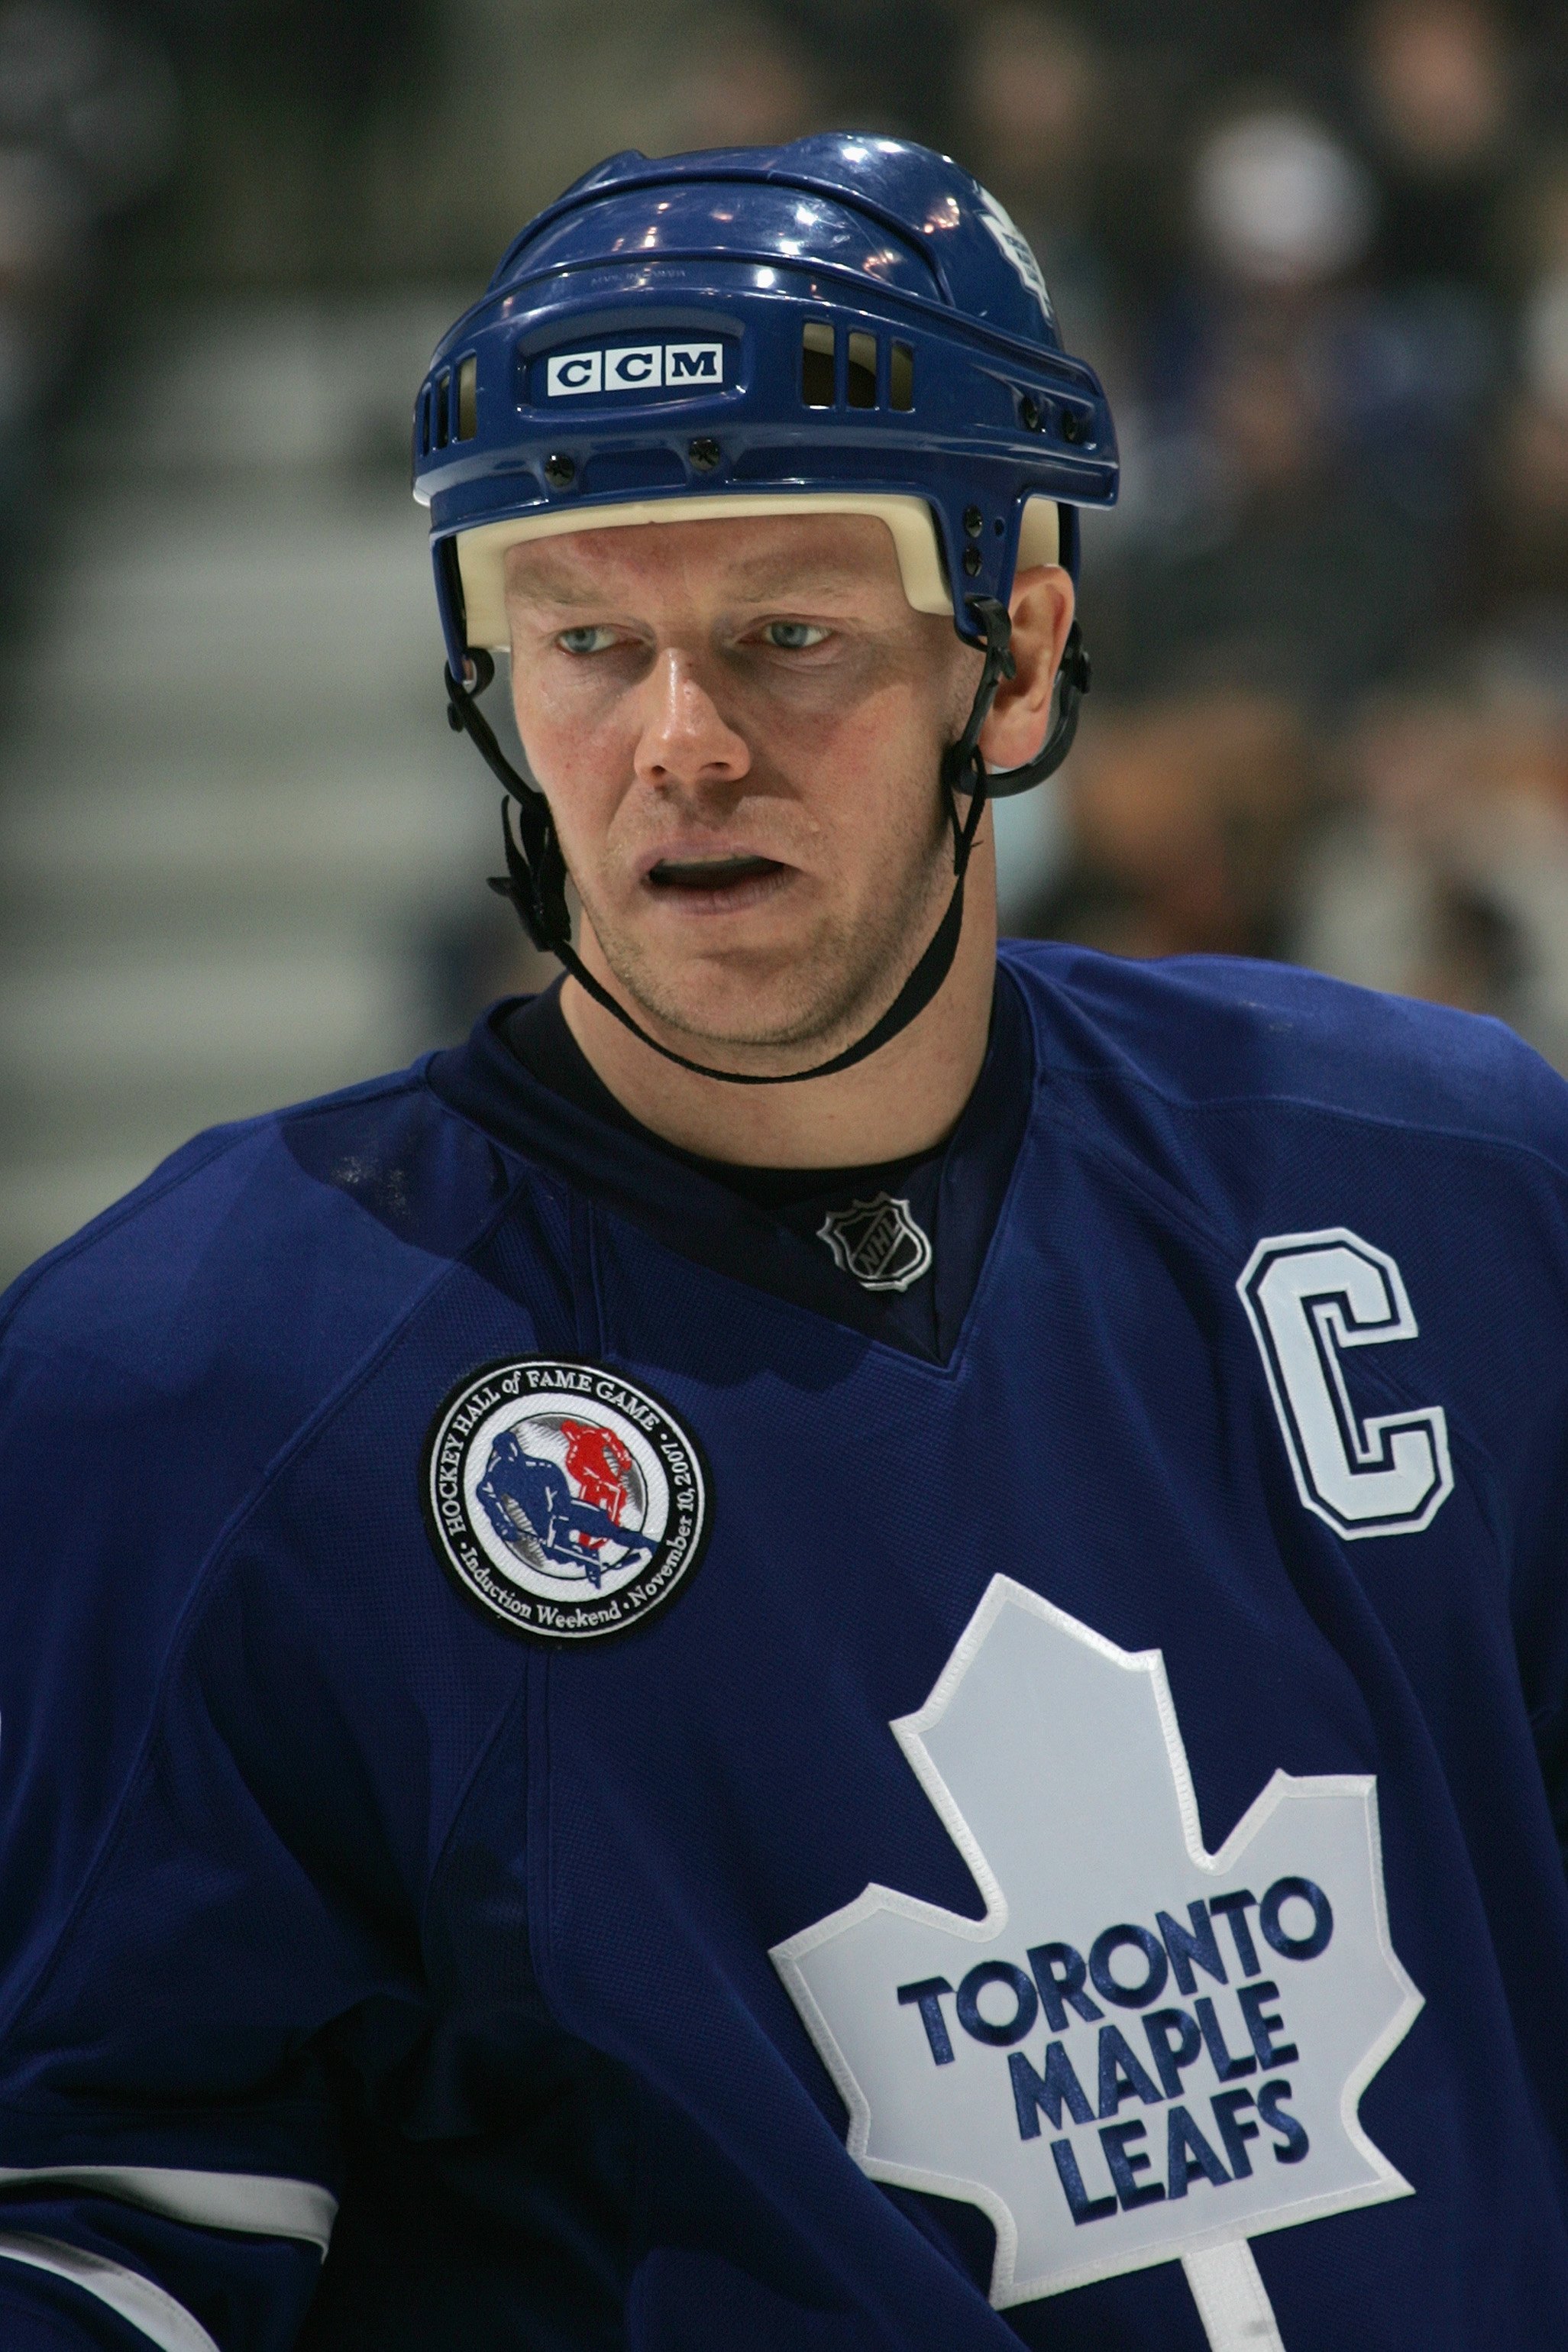 TORONTO, ON - NOVEMBER 10:  Mats Sundin #13 of the Toronto Maple Leafs looks on against the New York Rangers on November 10, 2007 at Air Canada Centre in Toronto, Ontario, Canada. (Photo by Bruce Bennett/Getty Images)